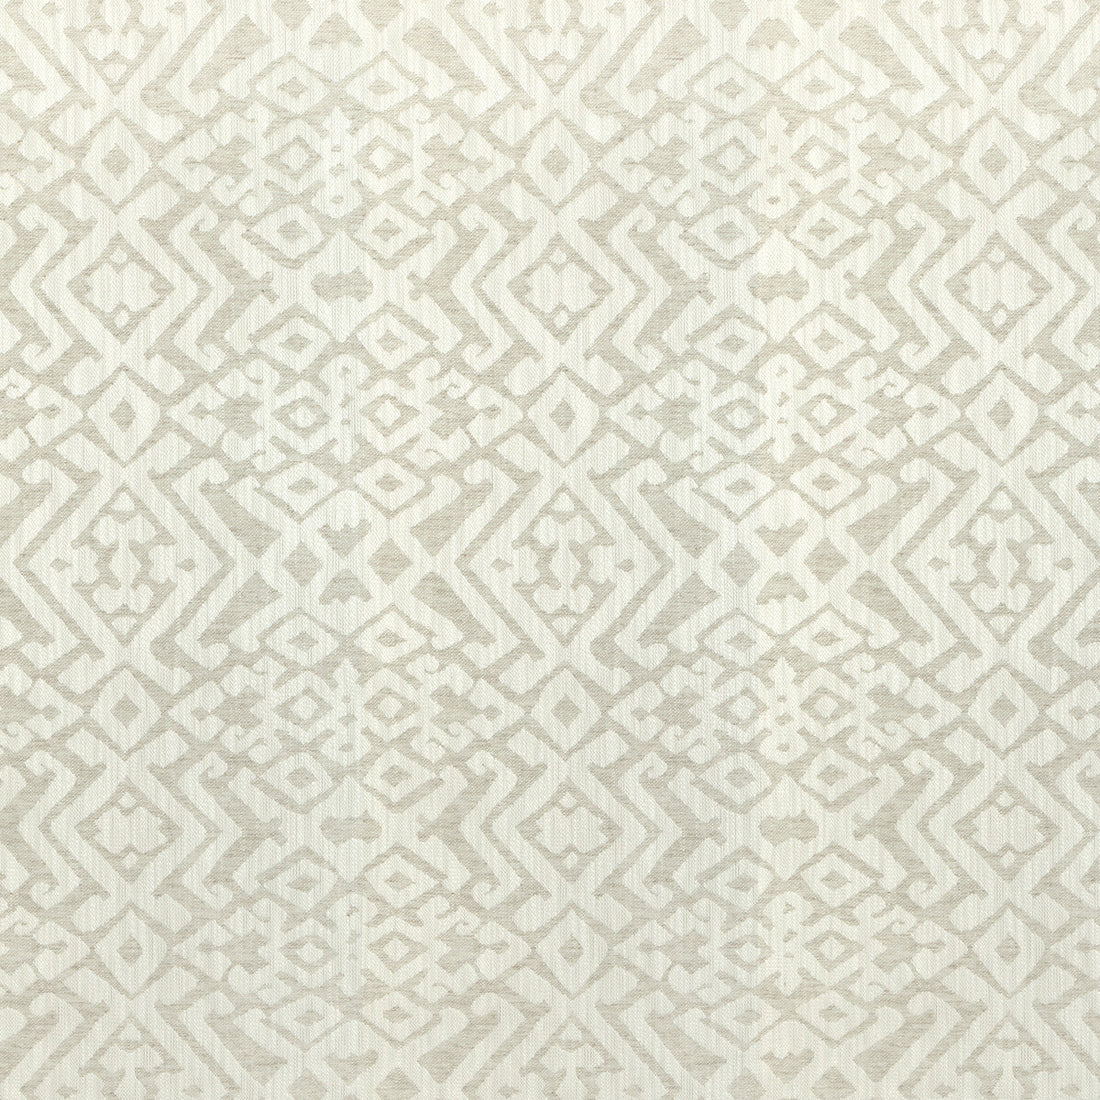 Springbok fabric in flax color - pattern 36874.1116.0 - by Kravet Couture in the Atelier Weaves collection